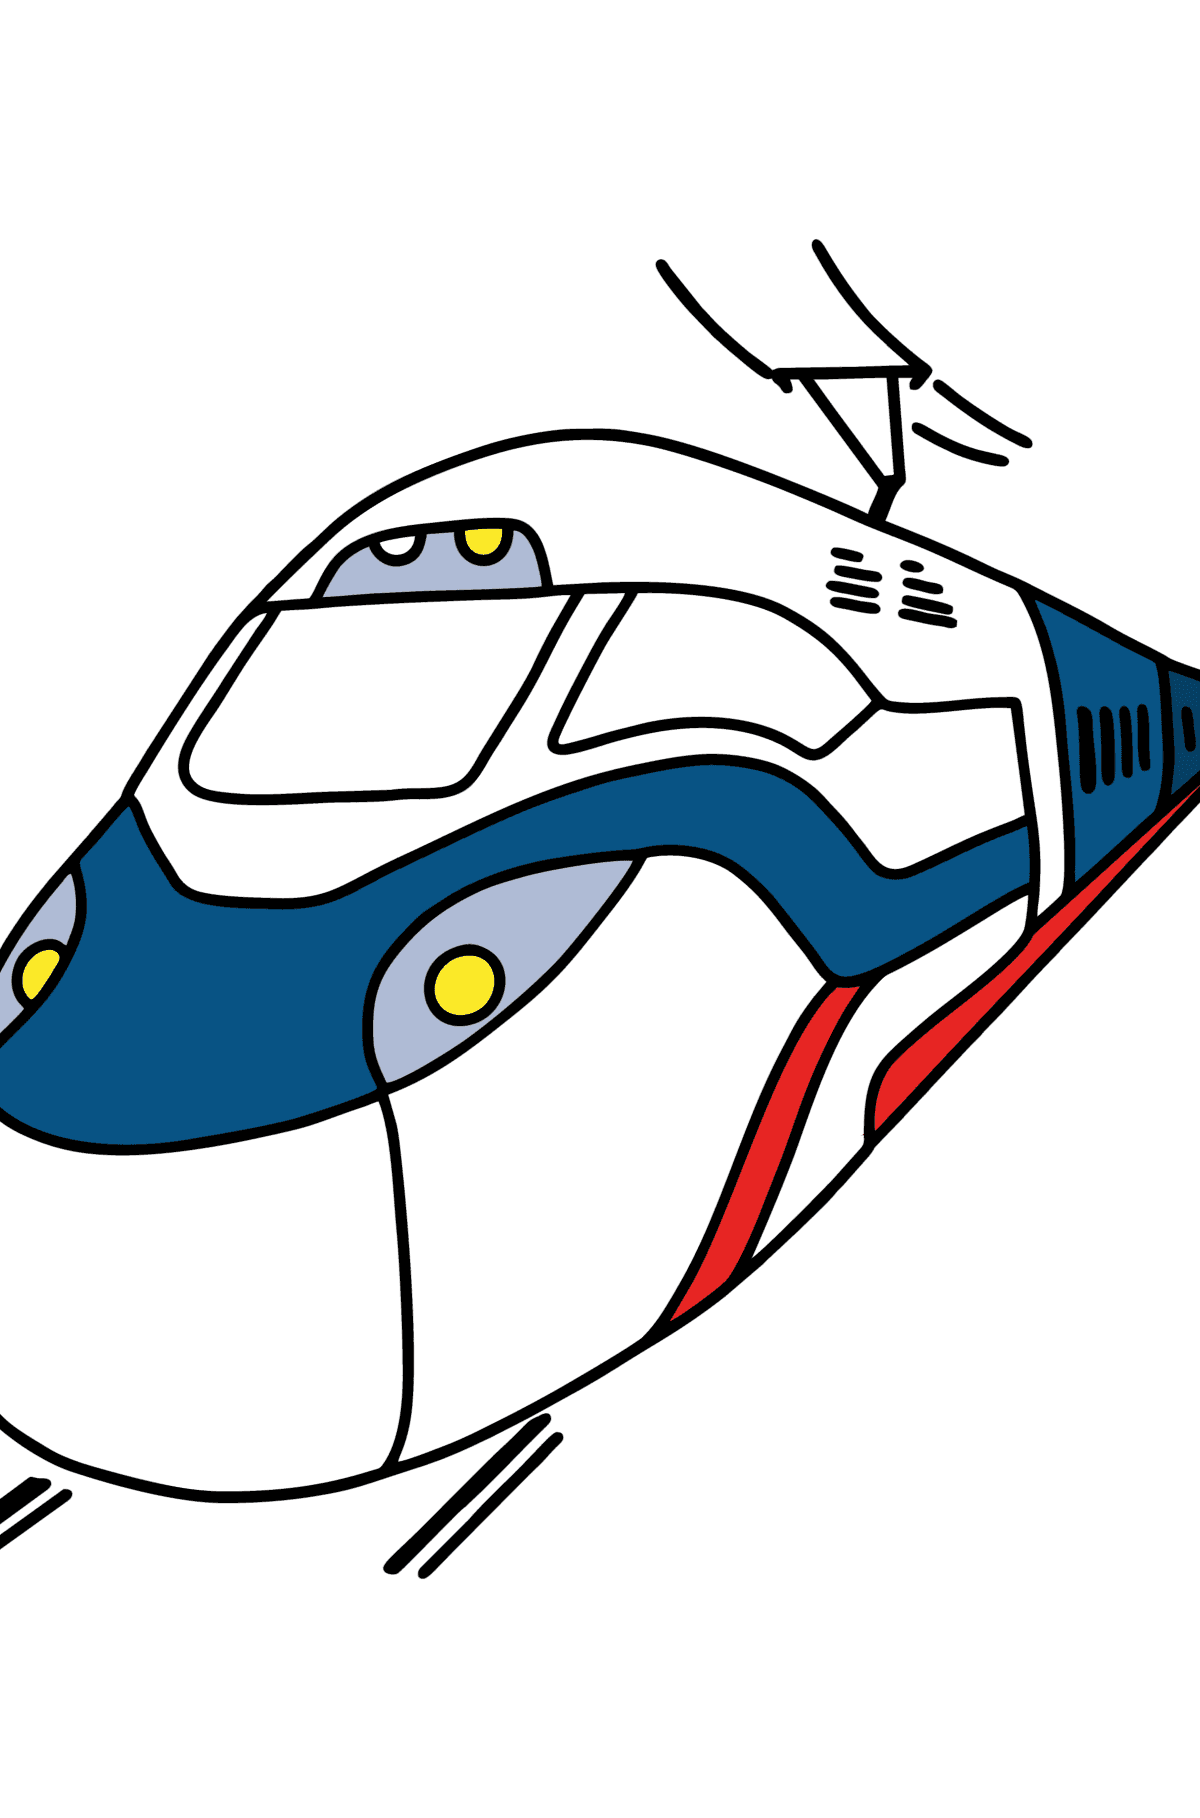 Train coloring page online - Coloring Pages for Kids